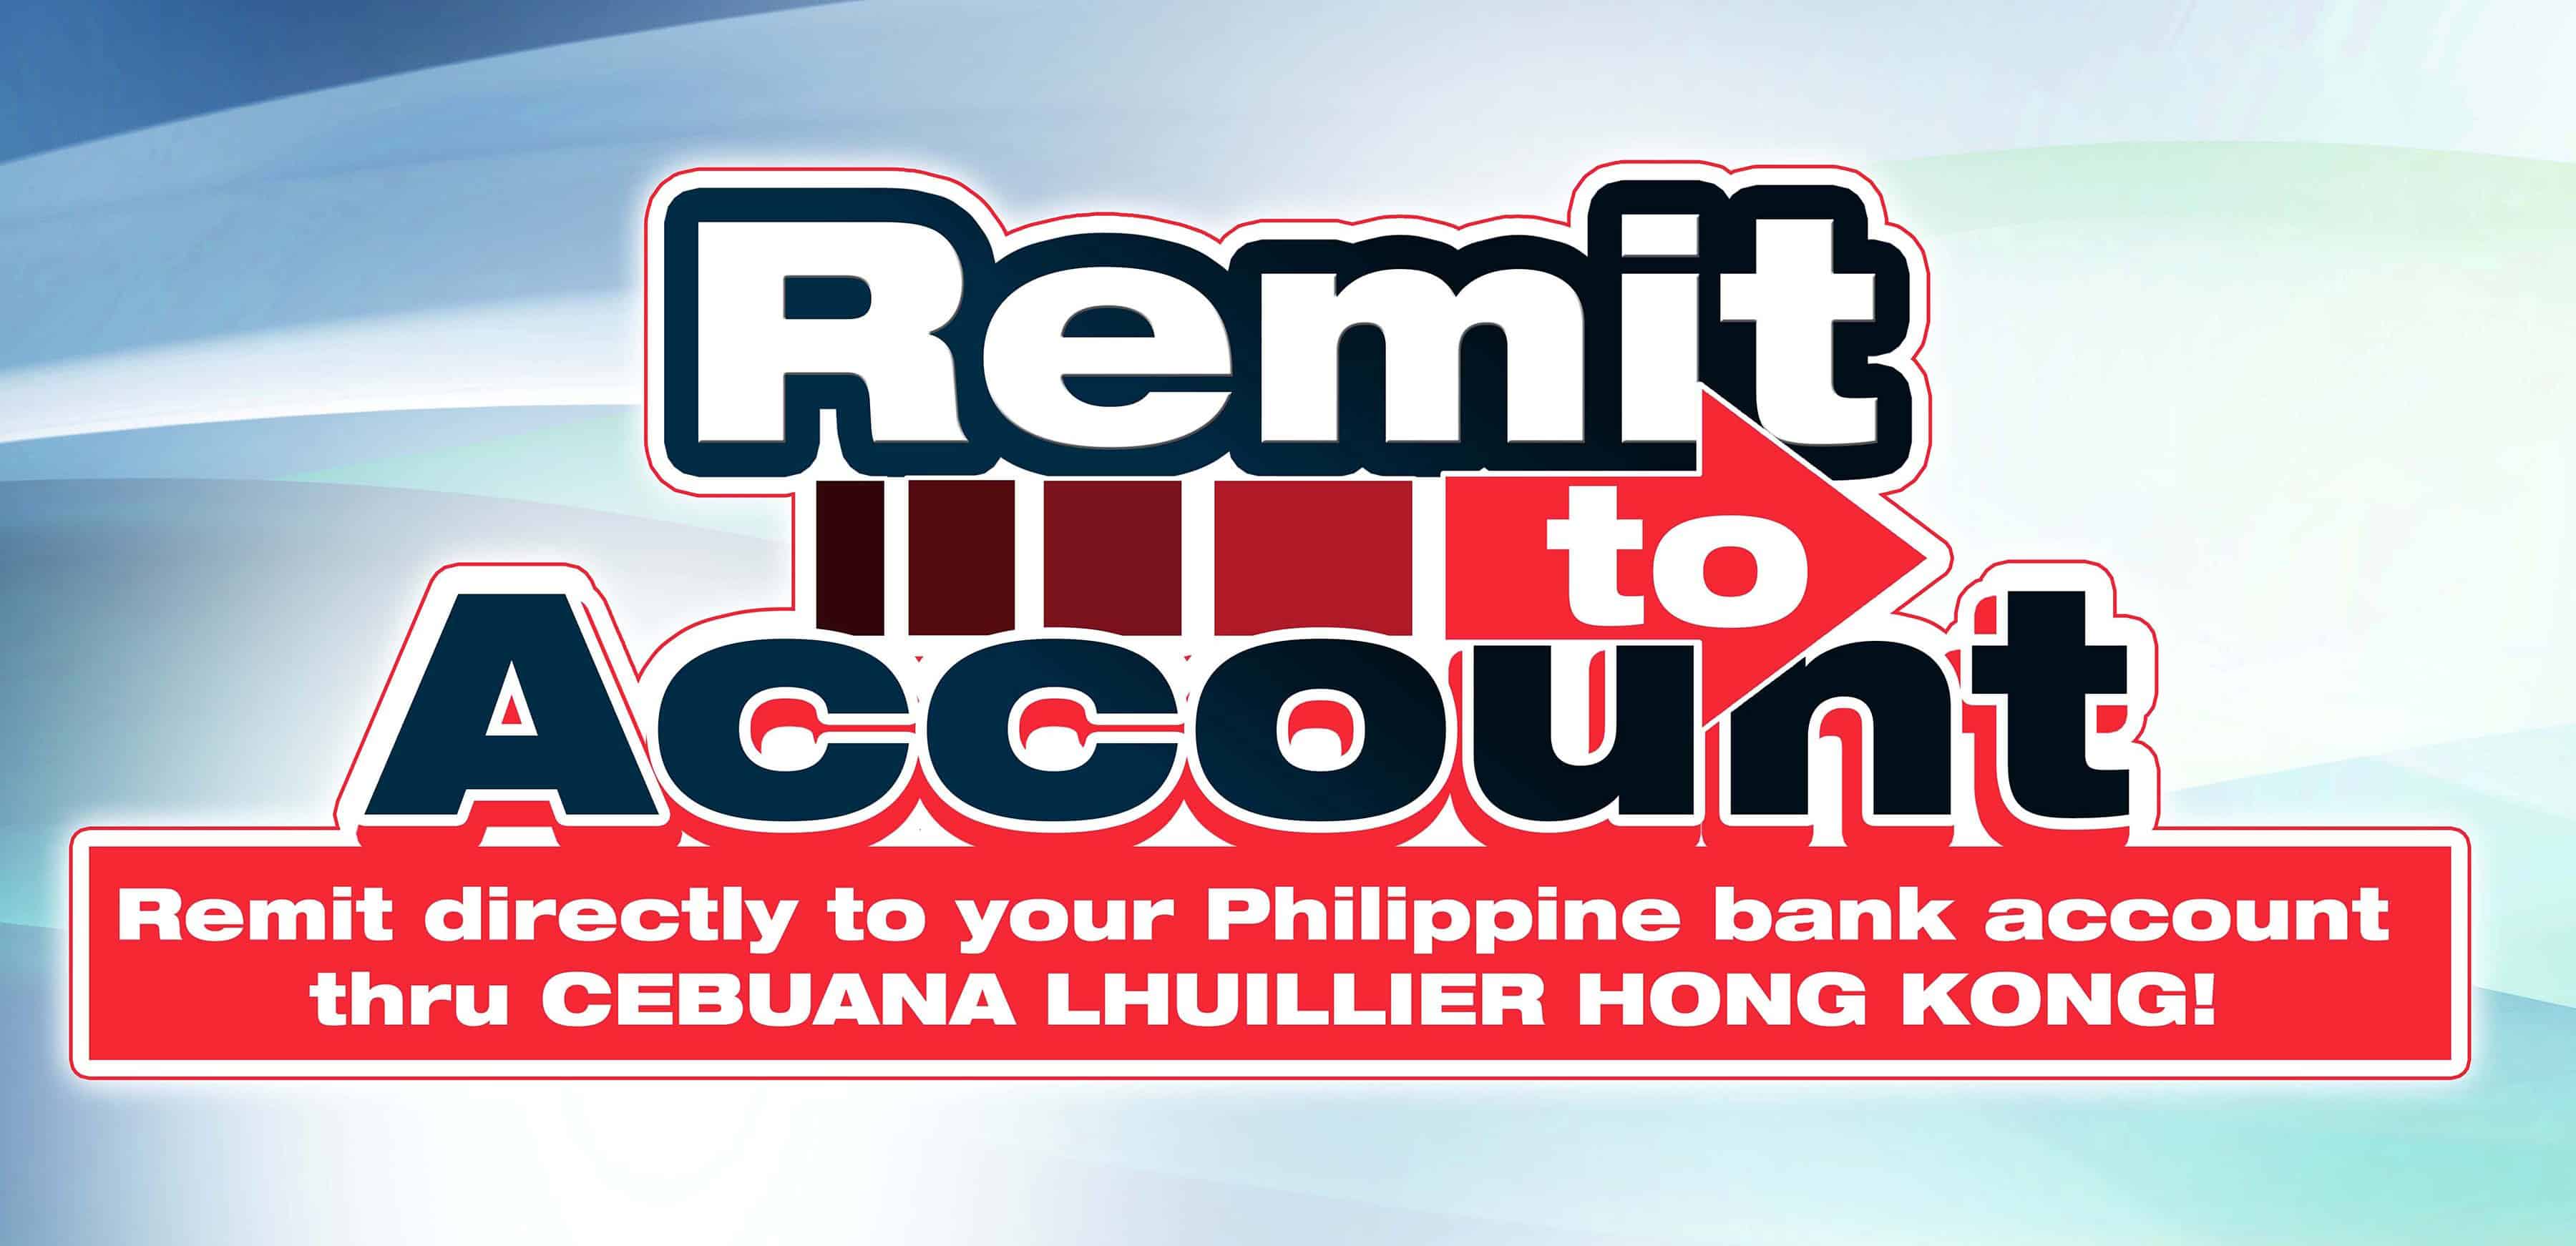 Cebuana Lhuillier Hong Kong Now Offers Remit To Account Cebuana - 